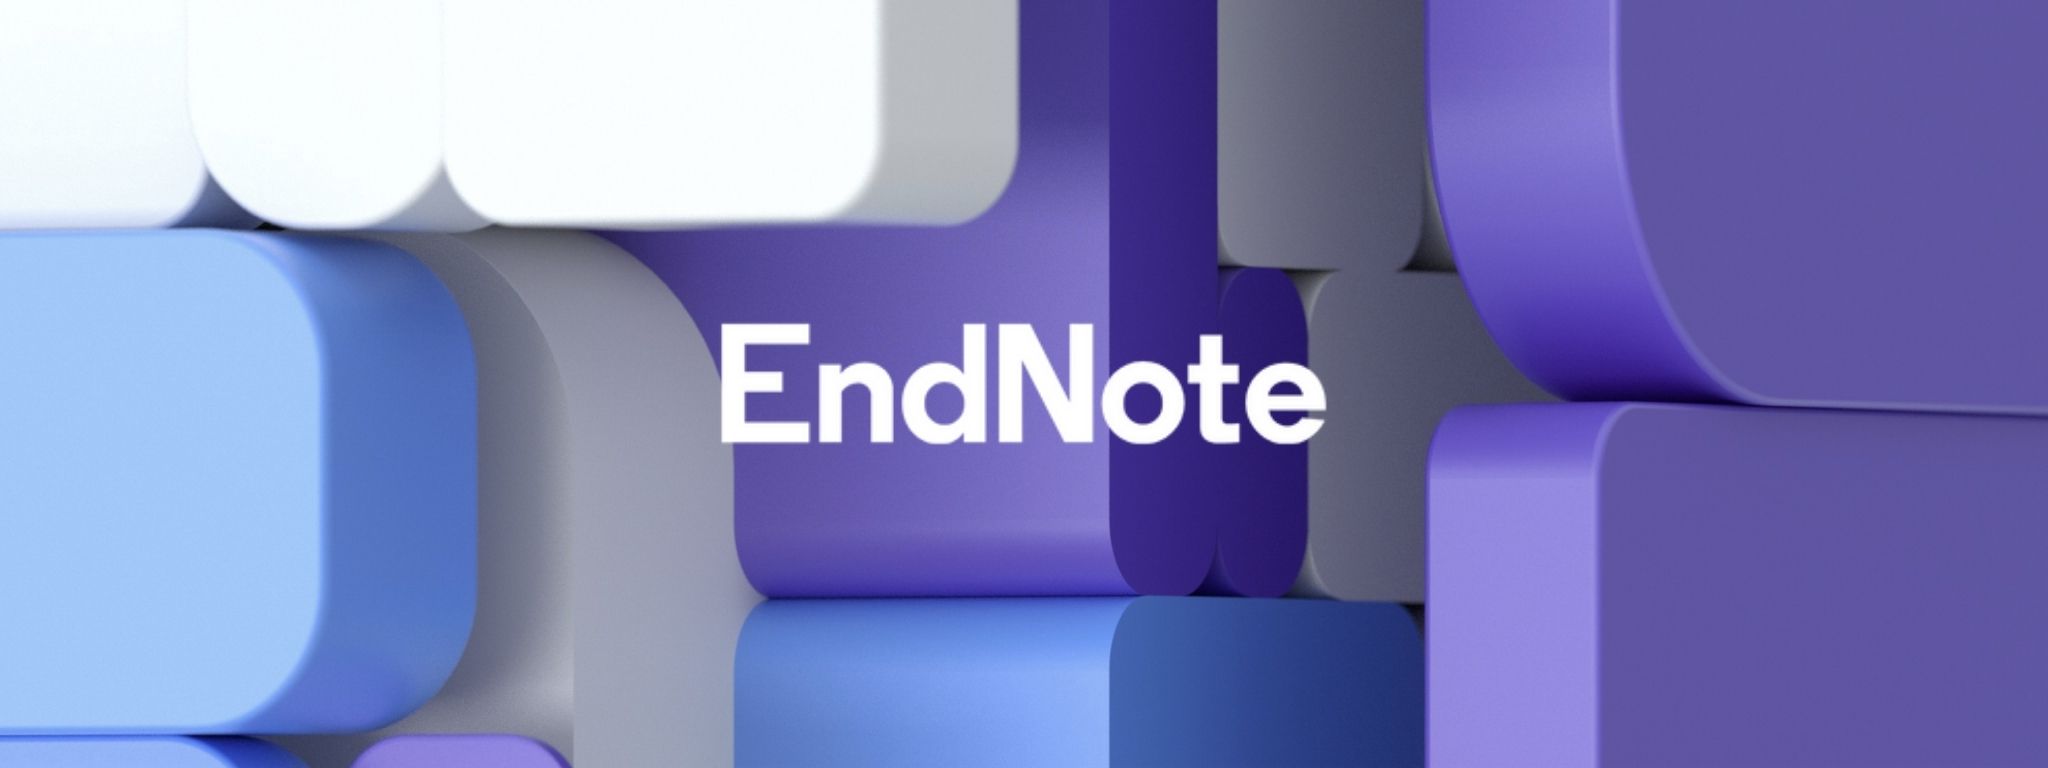 endnote free download for windows 10 pro